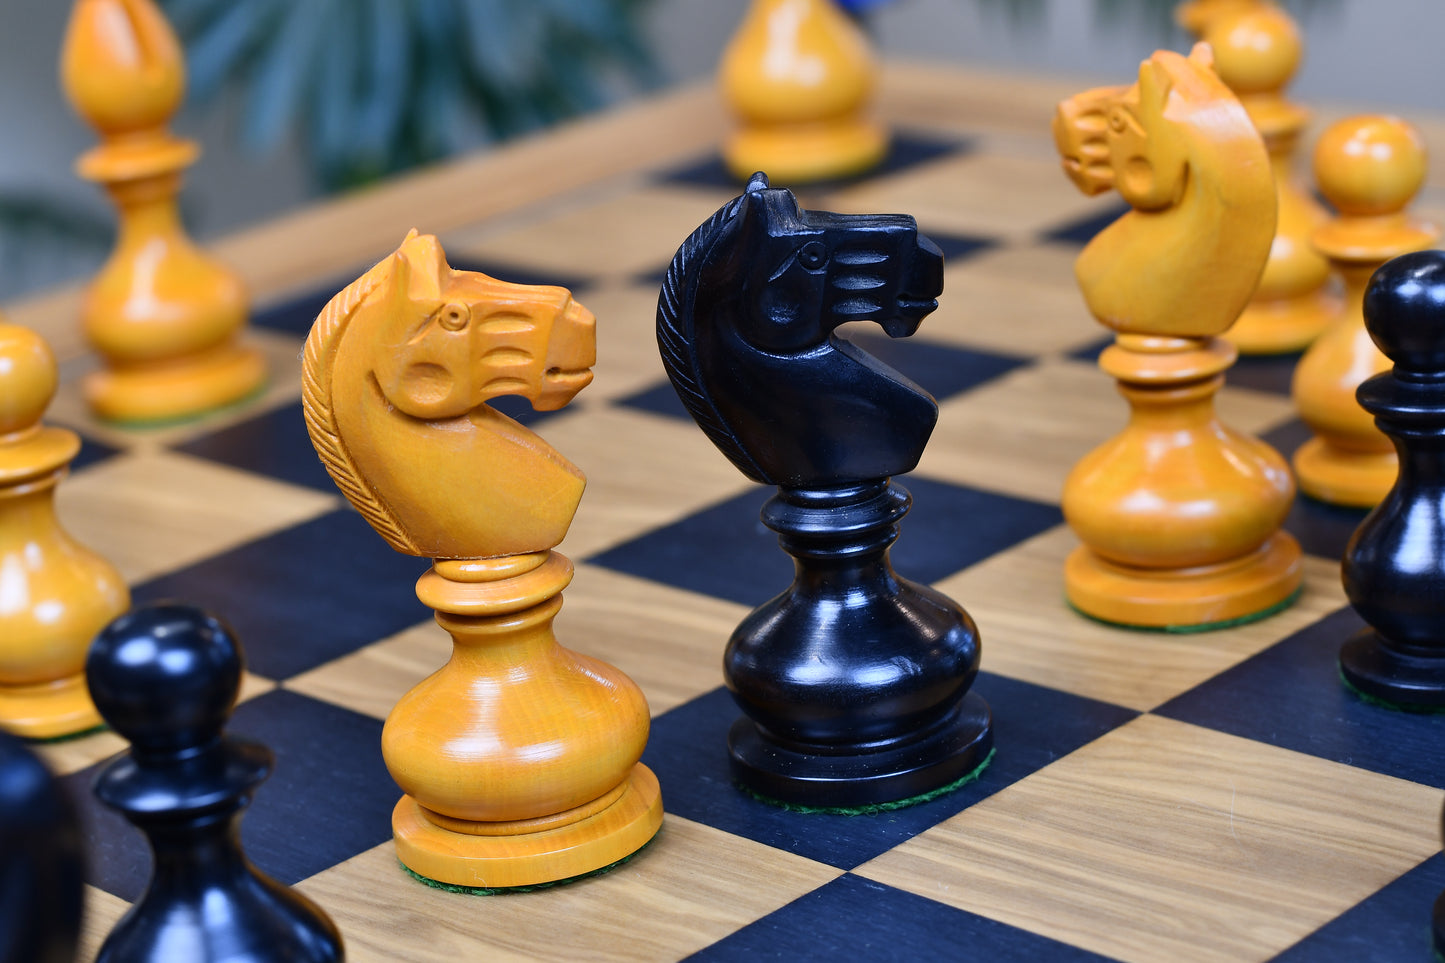 Reproduced Antique Series Dublin Pattern Calvert Chess Pieces in Ebonized Boxwood & Antiqued Boxwood - 4.1" King